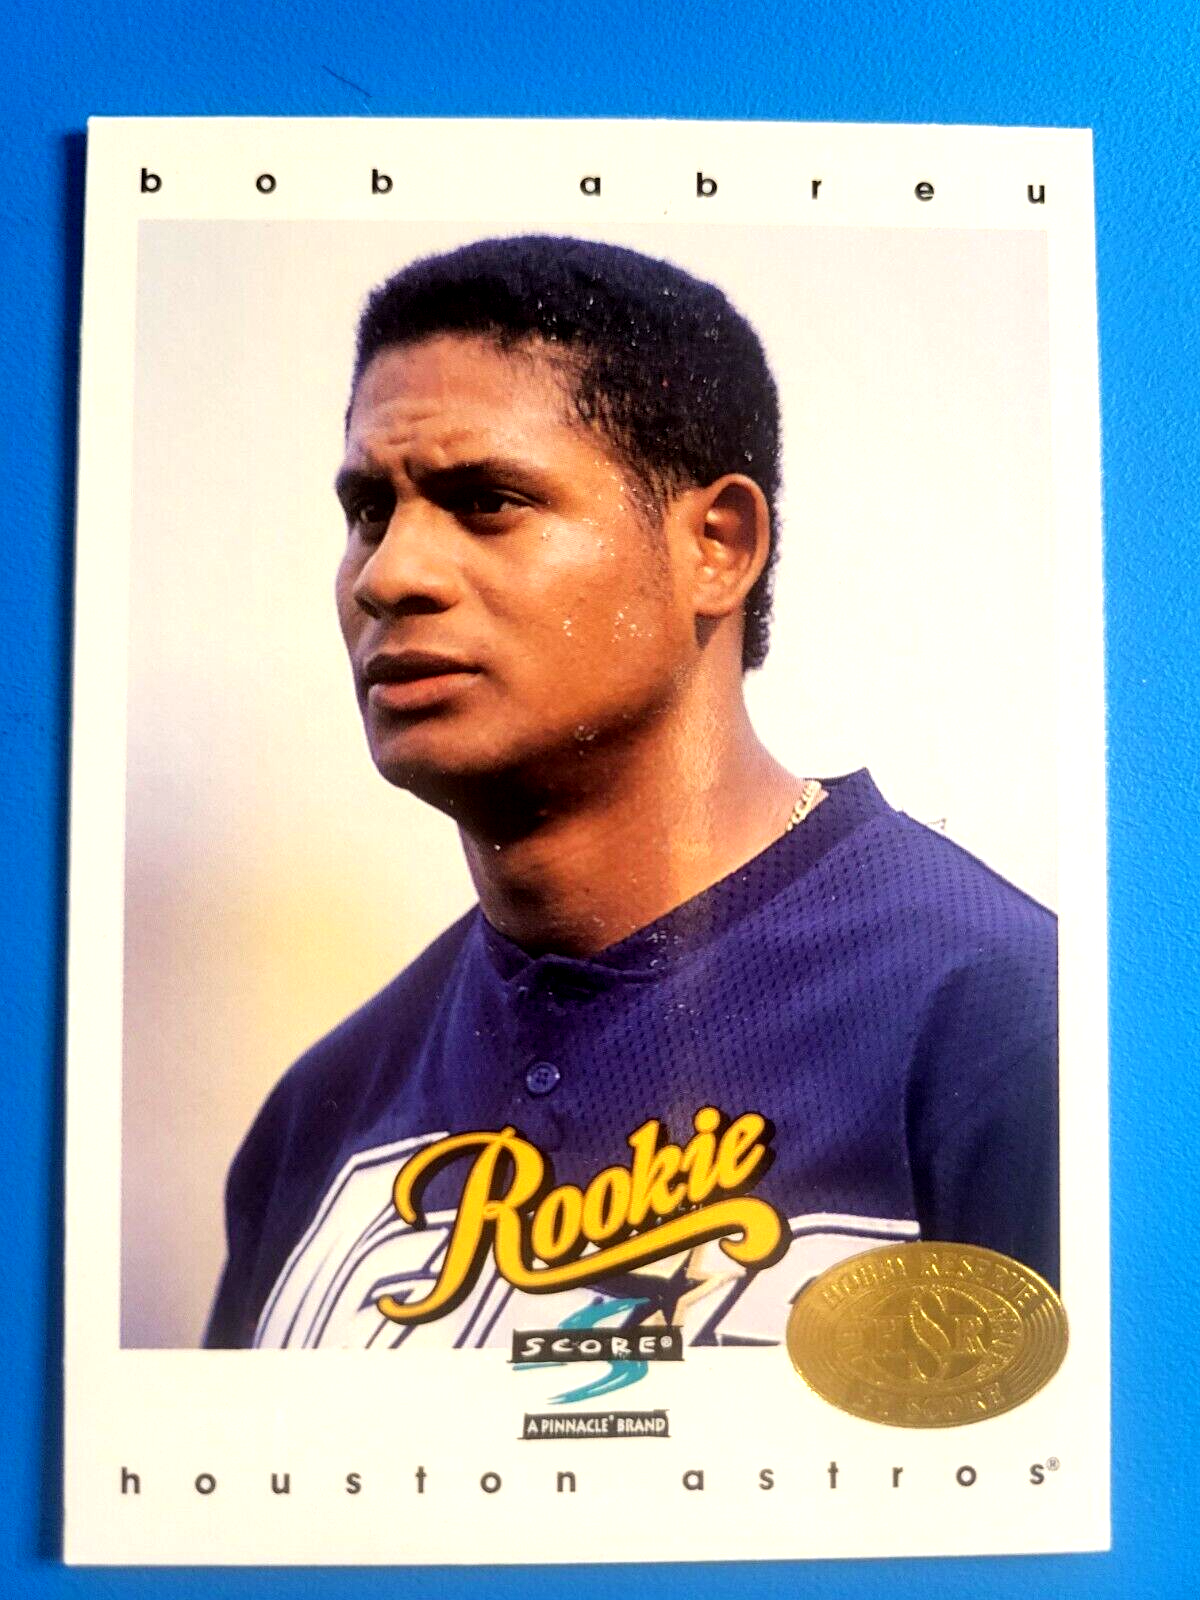 1997 Score Hobby Reserve Bobby Abreu #486- ROOKIE CARD. rookie card picture